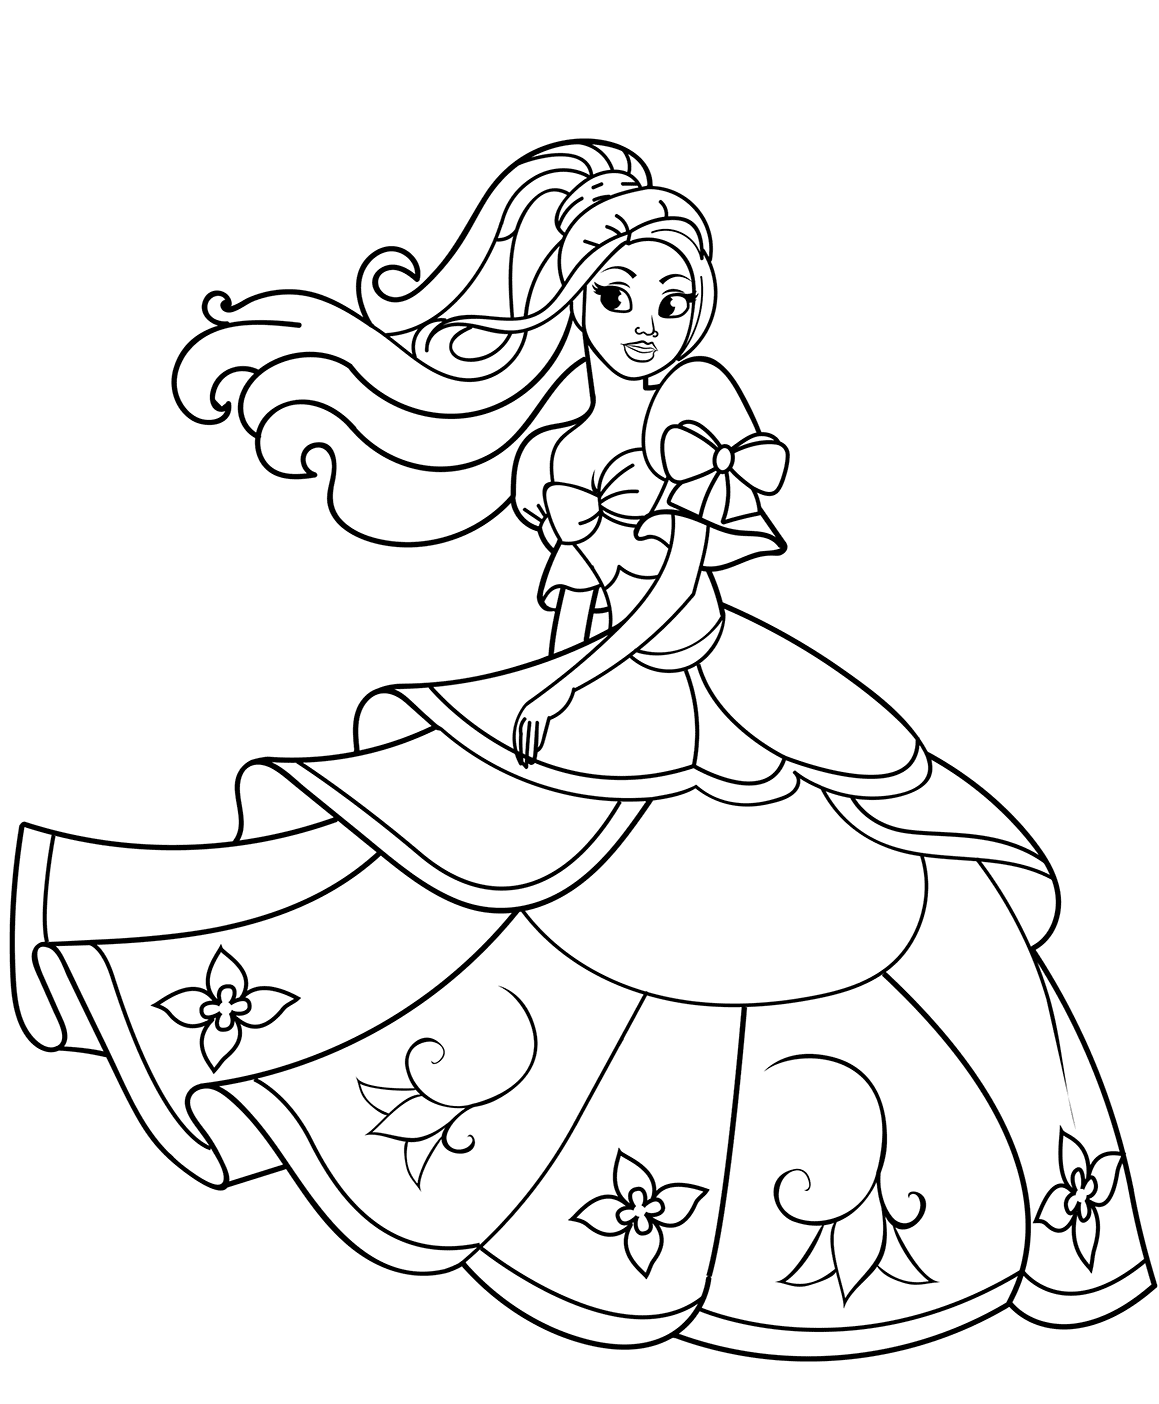 Dancing Barbie Princess Coloring Pages   Coloring Cool